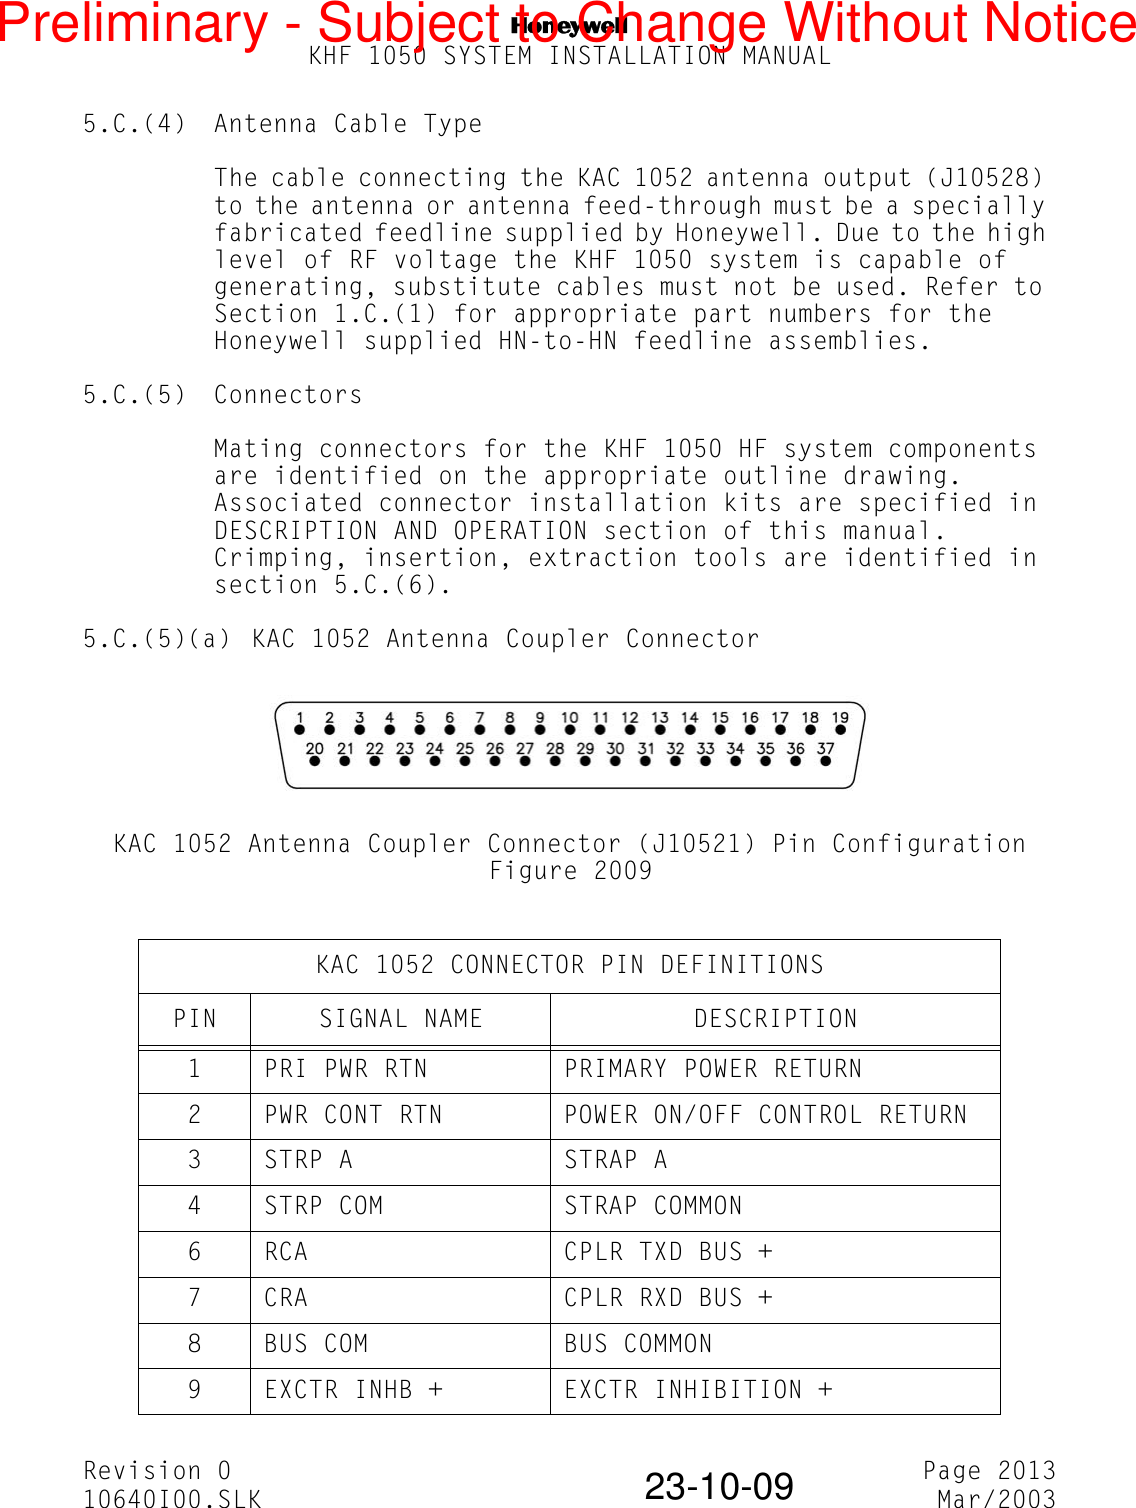 NKHF 1050 SYSTEM INSTALLATION MANUALRevision 0 Page 201310640I00.SLK Mar/200323-10-095.C.(4) Antenna Cable TypeThe cable connecting the KAC 1052 antenna output (J10528) to the antenna or antenna feed-through must be a specially fabricated feedline supplied by Honeywell. Due to the high level of RF voltage the KHF 1050 system is capable of generating, substitute cables must not be used. Refer to Section 1.C.(1) for appropriate part numbers for the Honeywell supplied HN-to-HN feedline assemblies.5.C.(5) ConnectorsMating connectors for the KHF 1050 HF system components are identified on the appropriate outline drawing. Associated connector installation kits are specified in DESCRIPTION AND OPERATION section of this manual. Crimping, insertion, extraction tools are identified in section 5.C.(6).5.C.(5)(a) KAC 1052 Antenna Coupler ConnectorKAC 1052 Antenna Coupler Connector (J10521) Pin ConfigurationFigure 2009KAC 1052 CONNECTOR PIN DEFINITIONSPIN SIGNAL NAME DESCRIPTION1 PRI PWR RTN PRIMARY POWER RETURN2 PWR CONT RTN POWER ON/OFF CONTROL RETURN3 STRP A STRAP A4 STRP COM STRAP COMMON6 RCA CPLR TXD BUS +7 CRA CPLR RXD BUS +8 BUS COM BUS COMMON9 EXCTR INHB + EXCTR INHIBITION +Preliminary - Subject to Change Without Notice